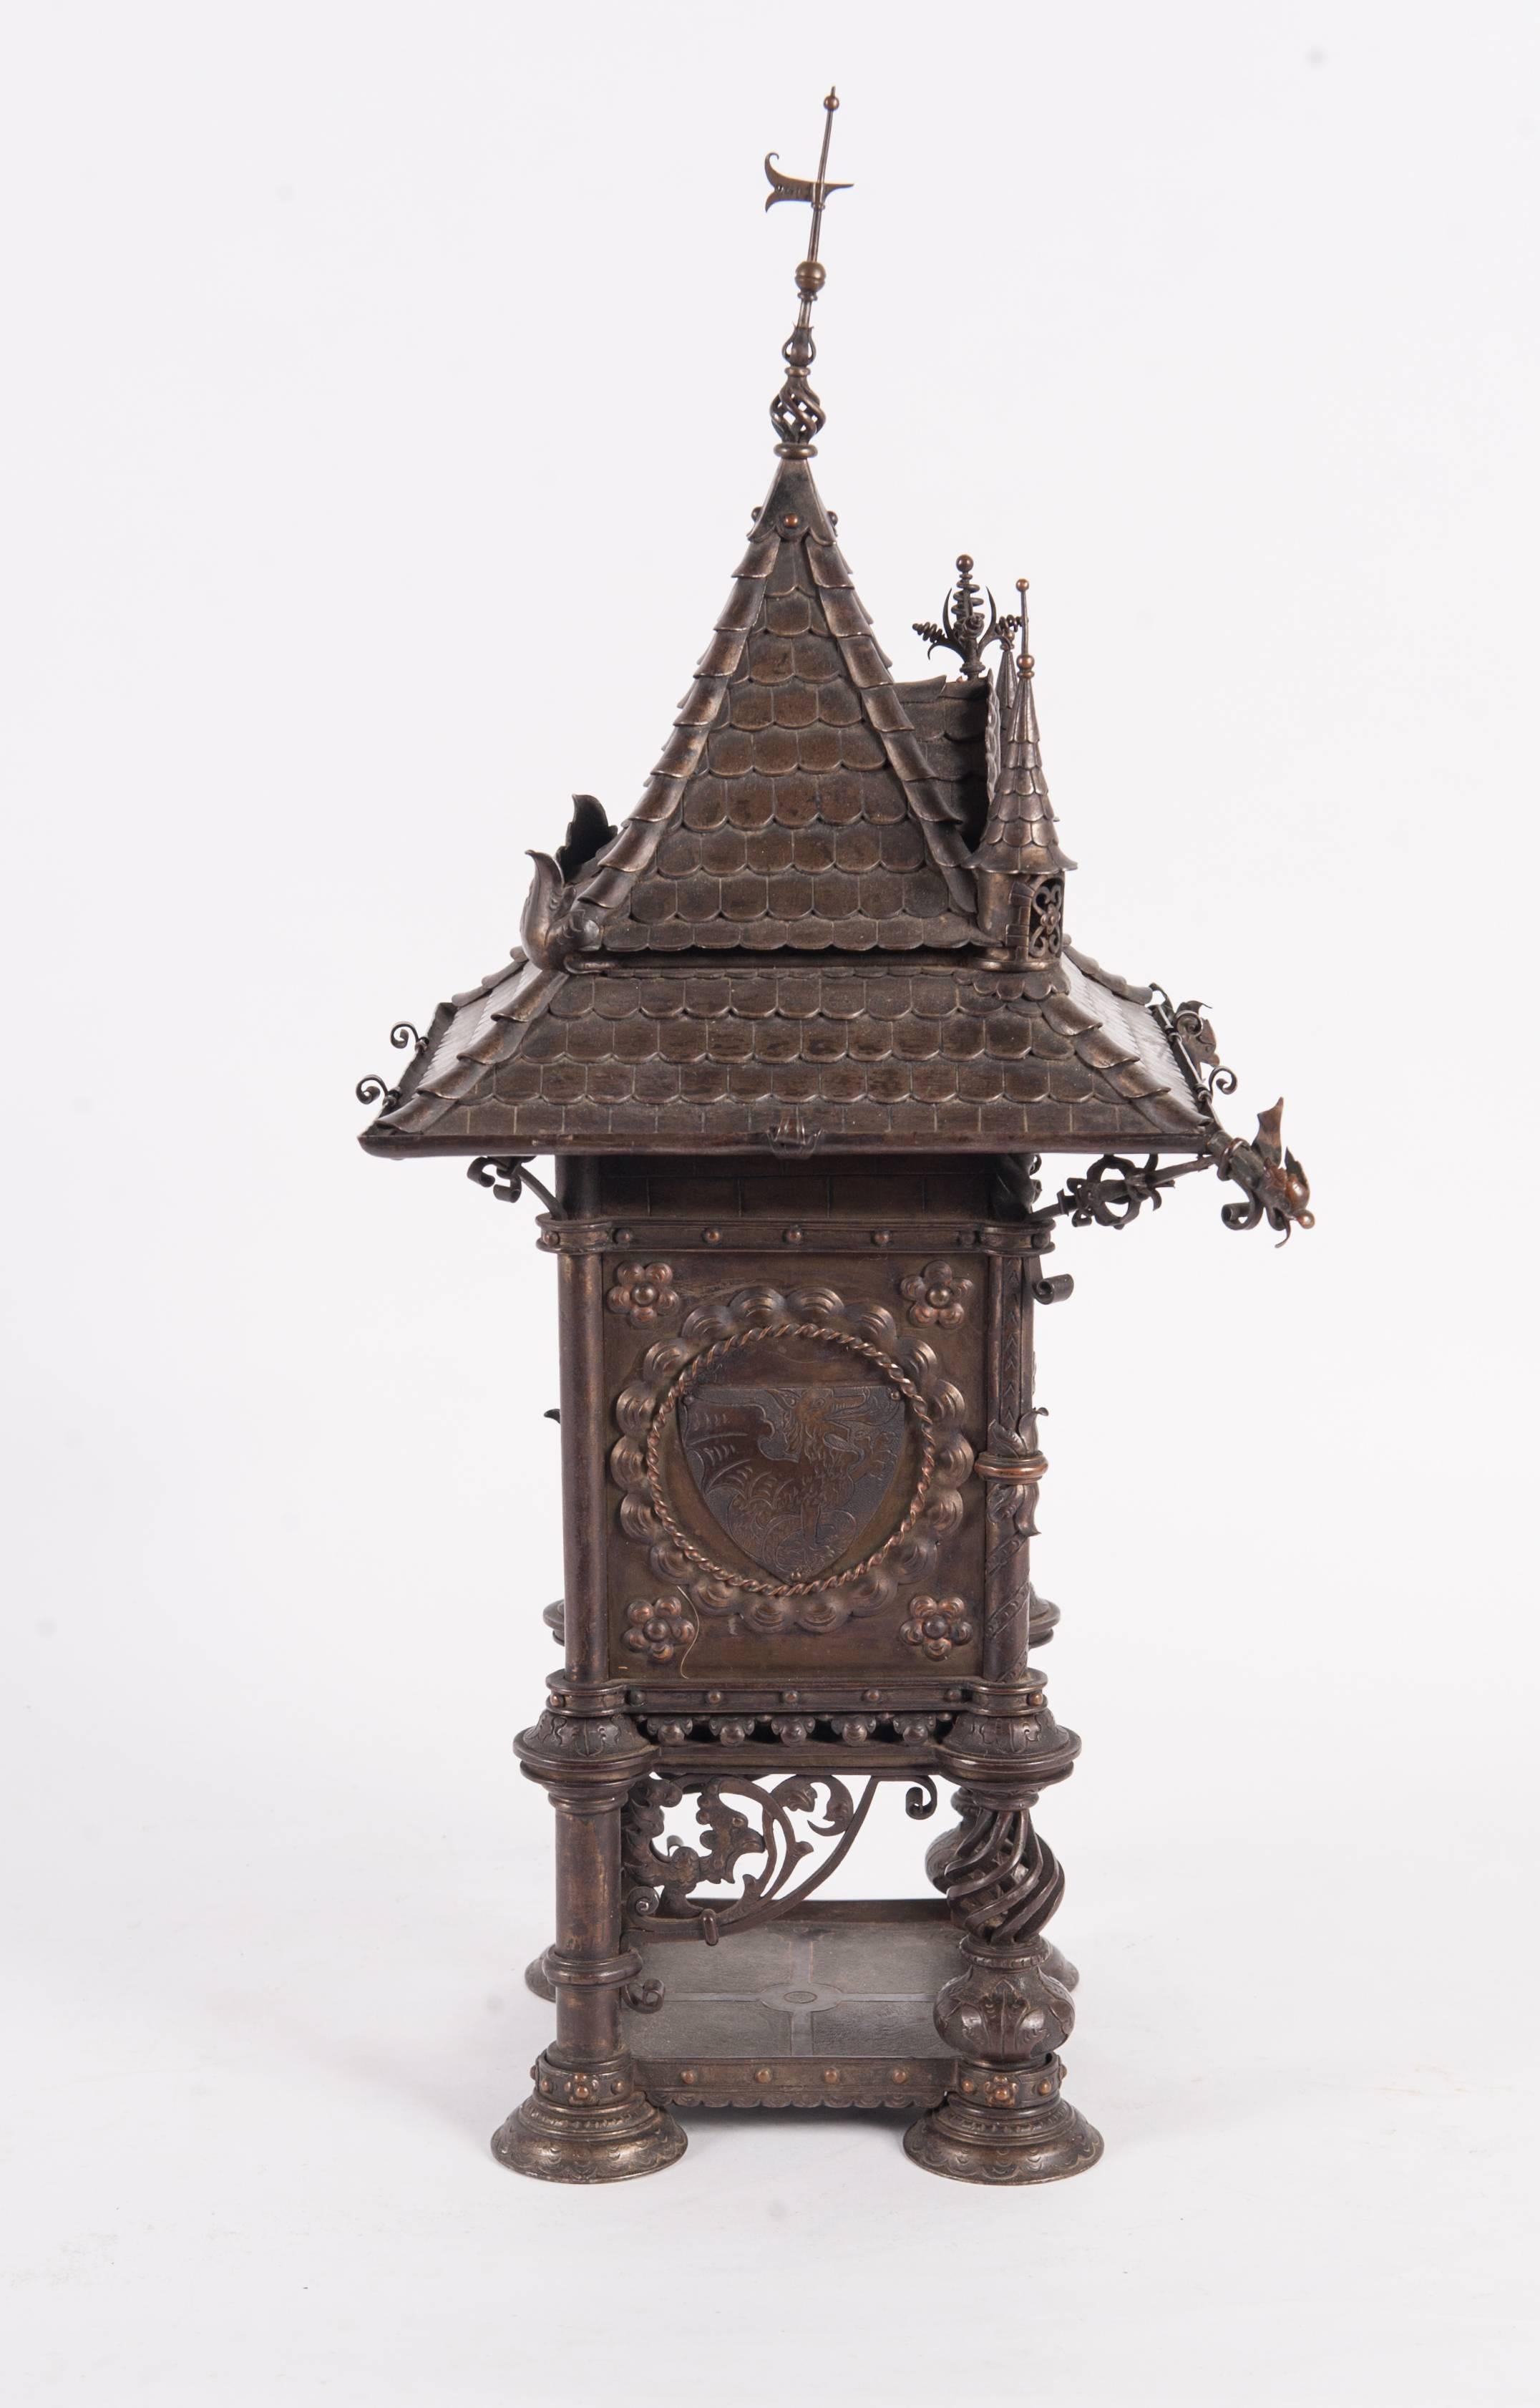 A very nice and decorative wrought iron mental clock in Arts and Crafts period. Lovely designed from the so-called 